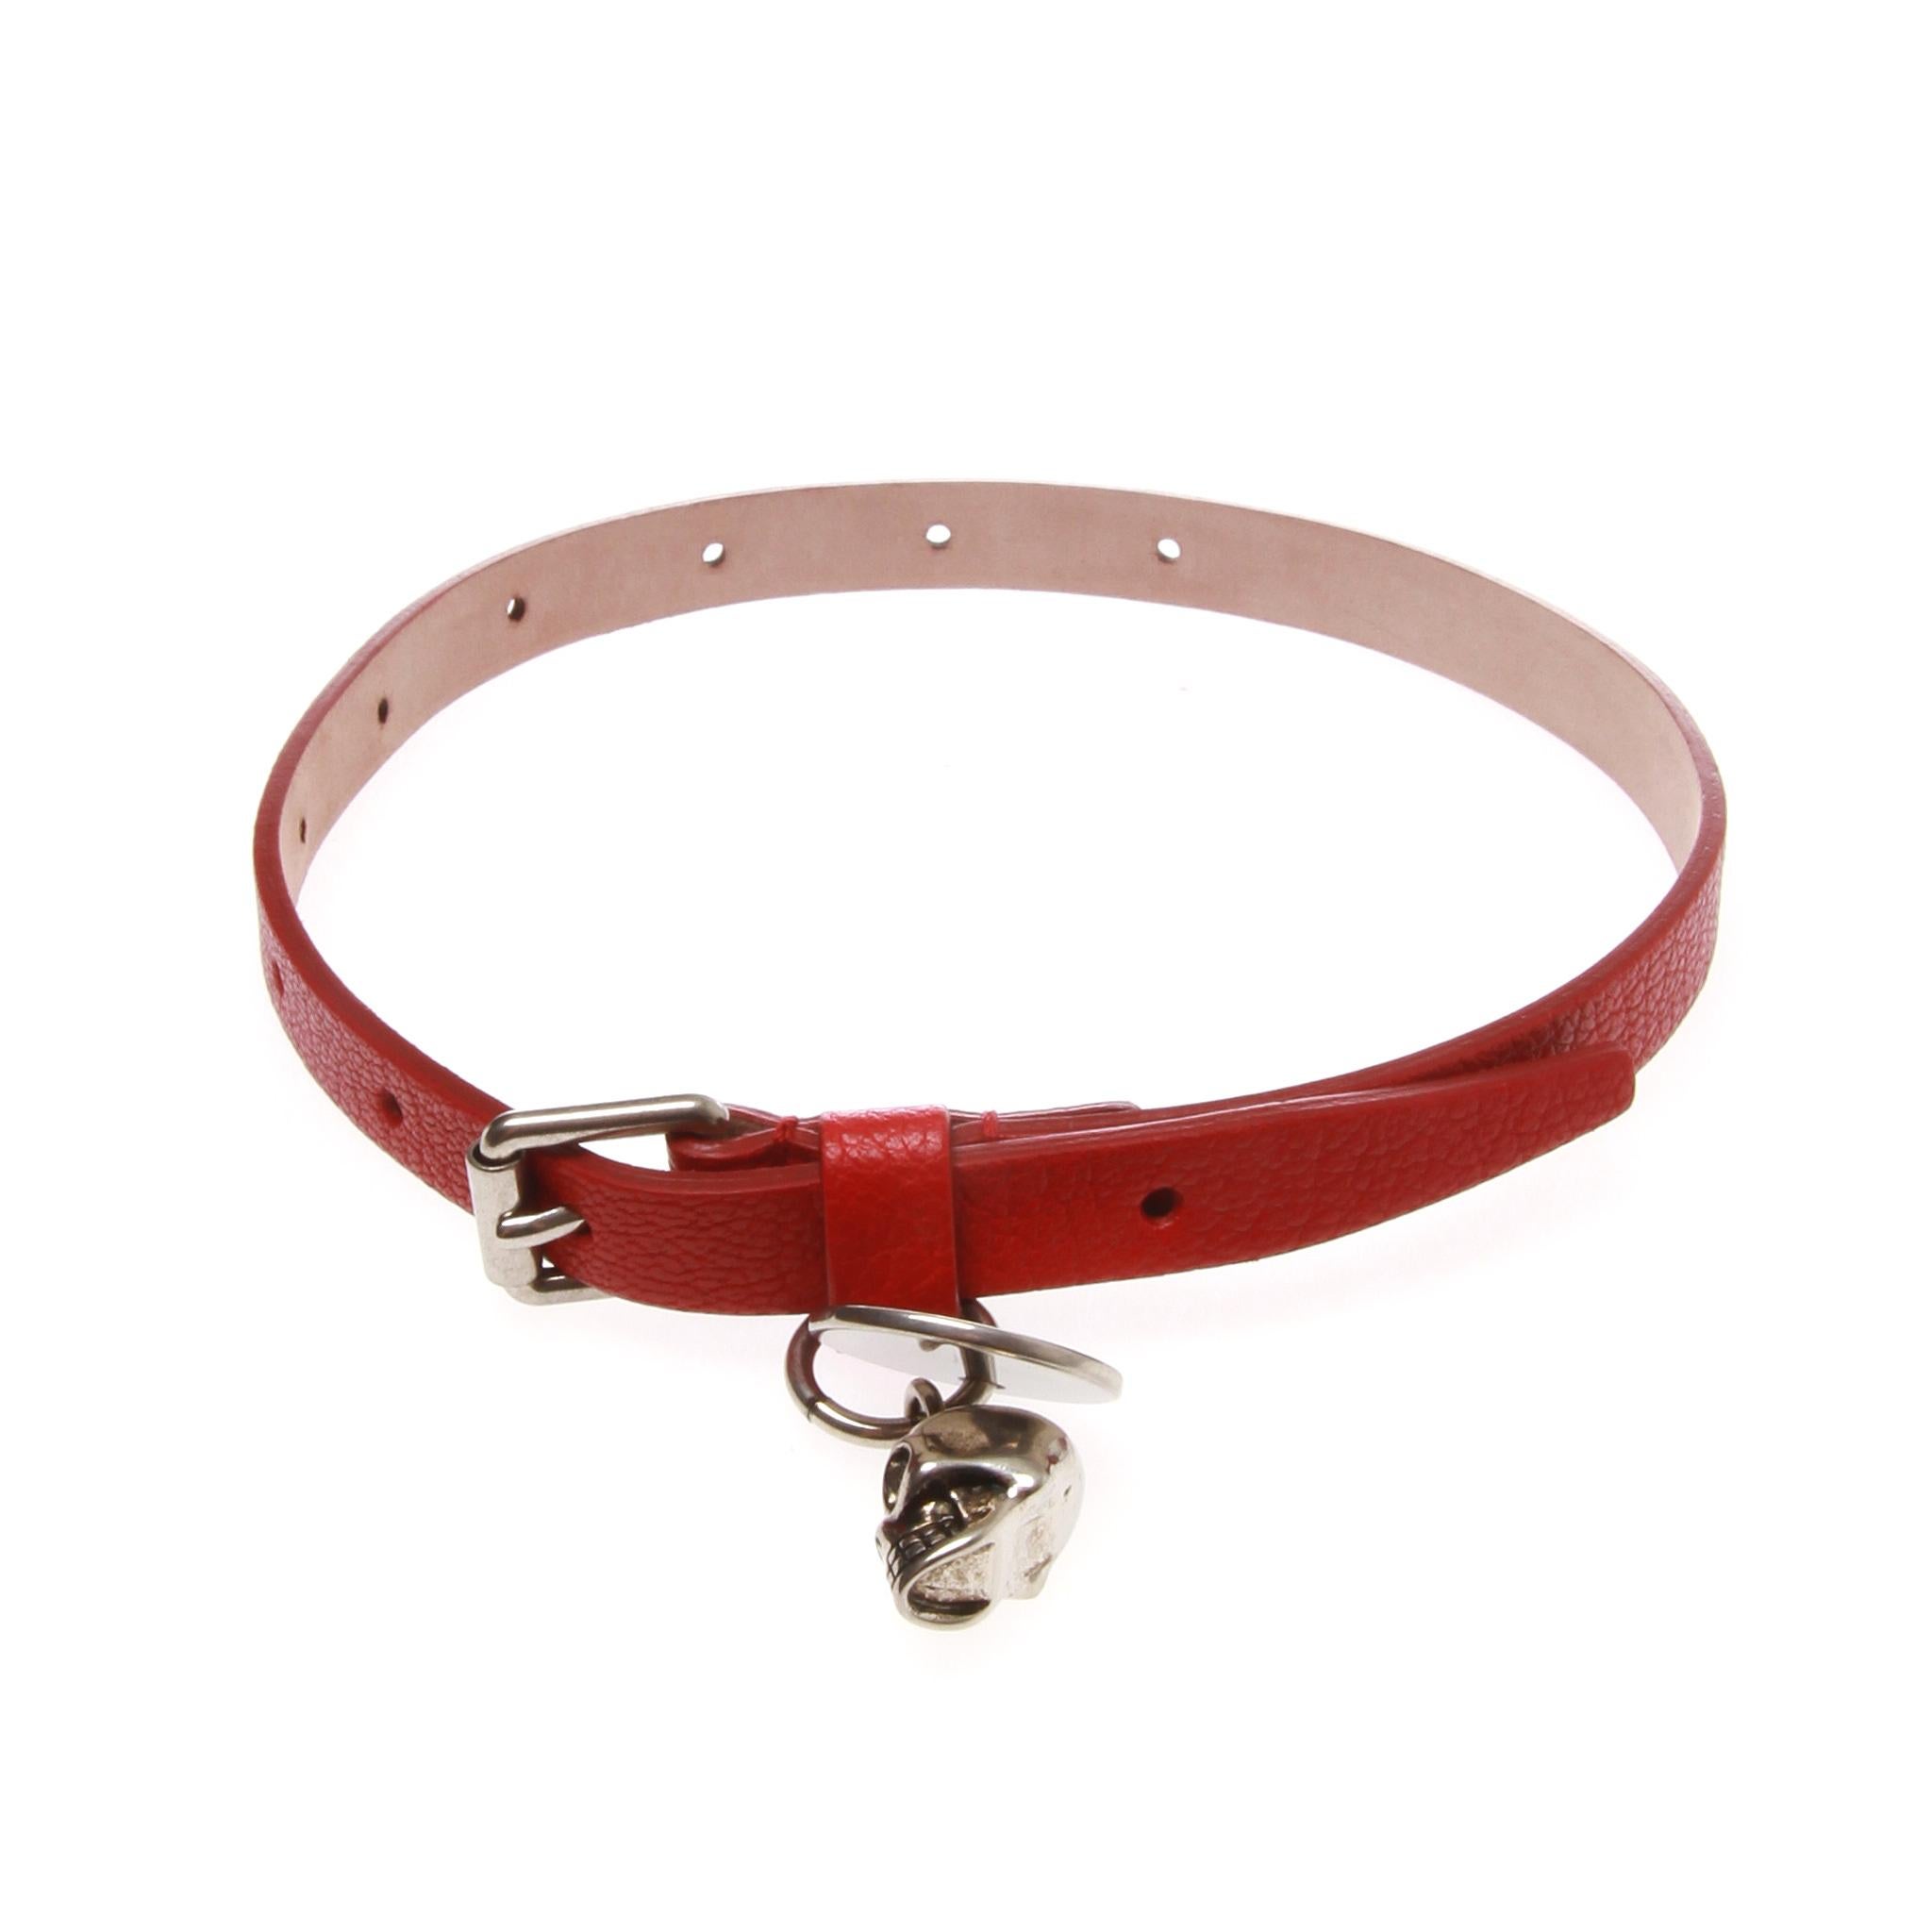 	
Alexander McQueen Skull Charm Bracelet
Featuring red colour leather and a silver tone skull charm. 
Fashion has no boundaries...
Closing/Opening: Buckle